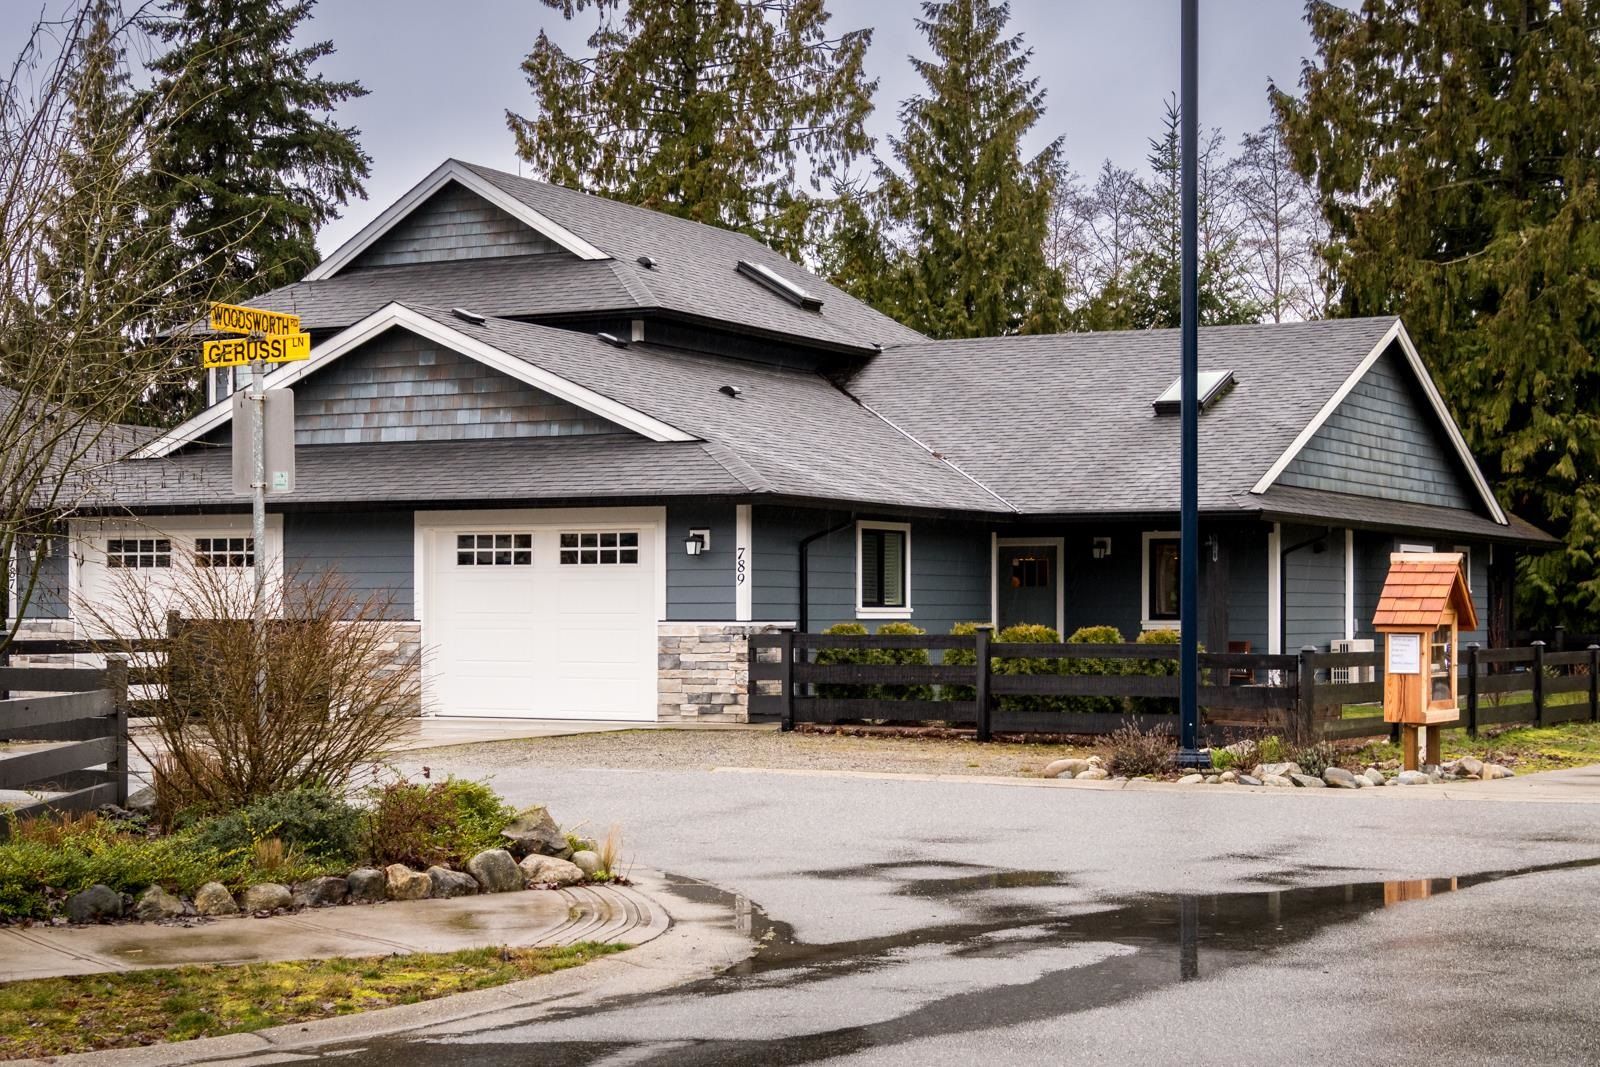 Main Photo: 789 GERUSSI Lane in Gibsons: Gibsons & Area 1/2 Duplex for sale (Sunshine Coast)  : MLS®# R2754647